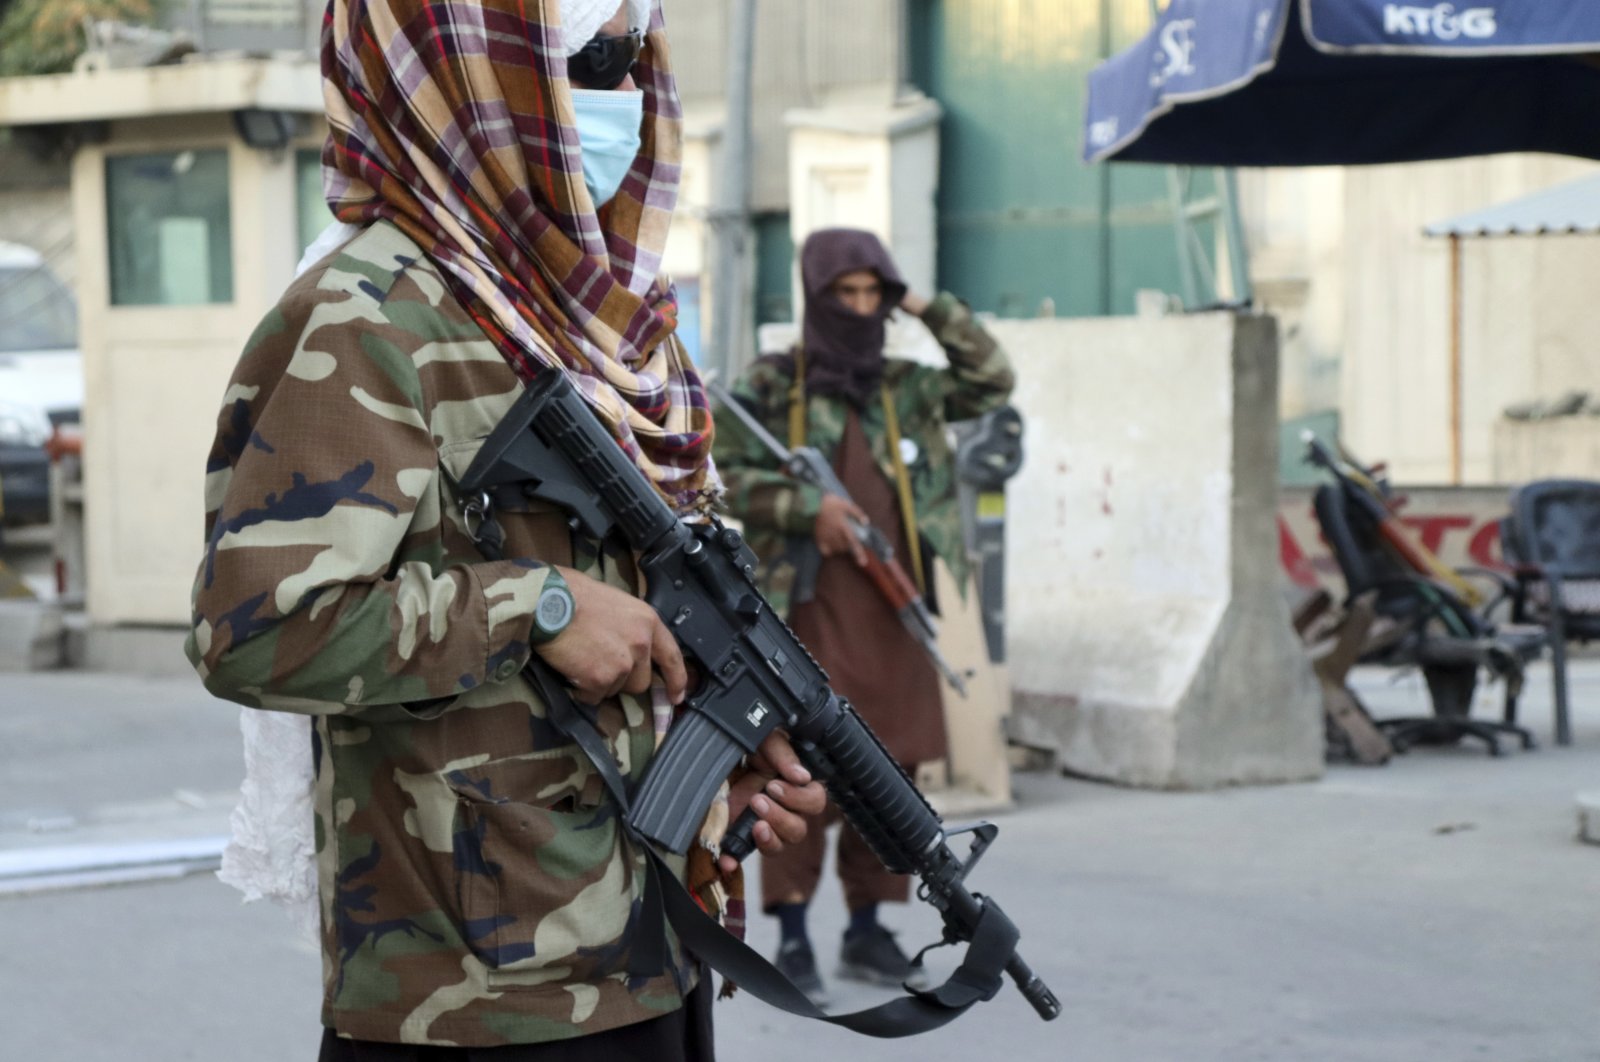 Taliban fighters stand guard at a checkpoint in Kabul, Afghanistan, Wednesday, Aug. 25, 2021. (AP Photo)